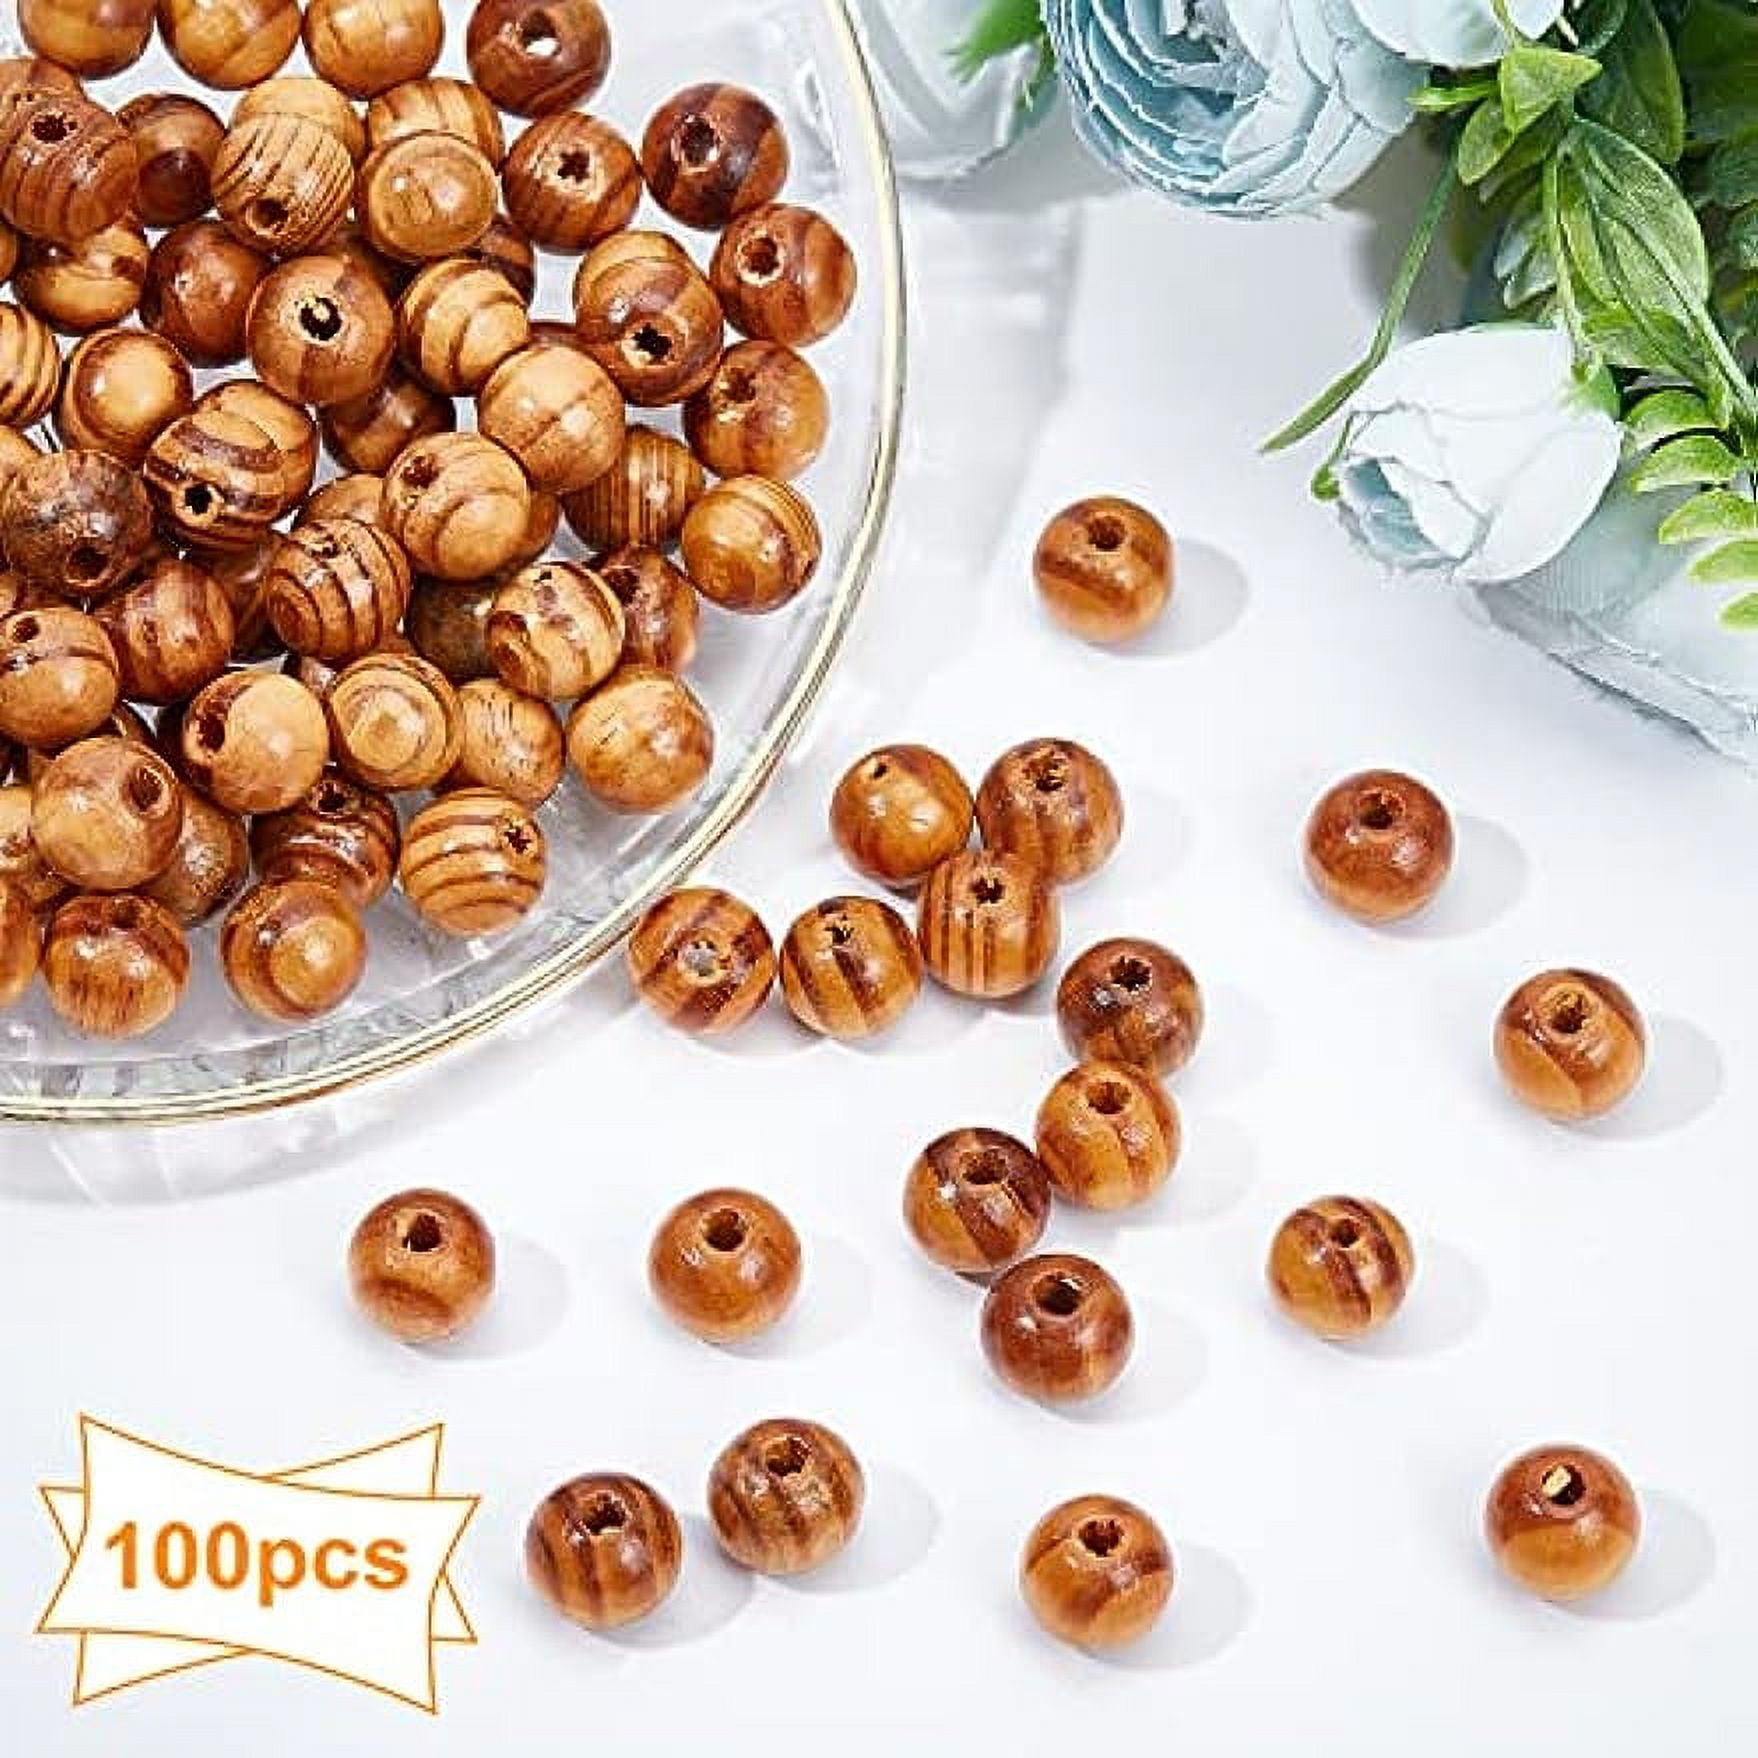 Beadia 20-100Pcs/Lot Natural Wenge Wood Loose Spacer Round Beads Spacers  Buddha Beads For Jewelry Making Bracelets Earrings DIY